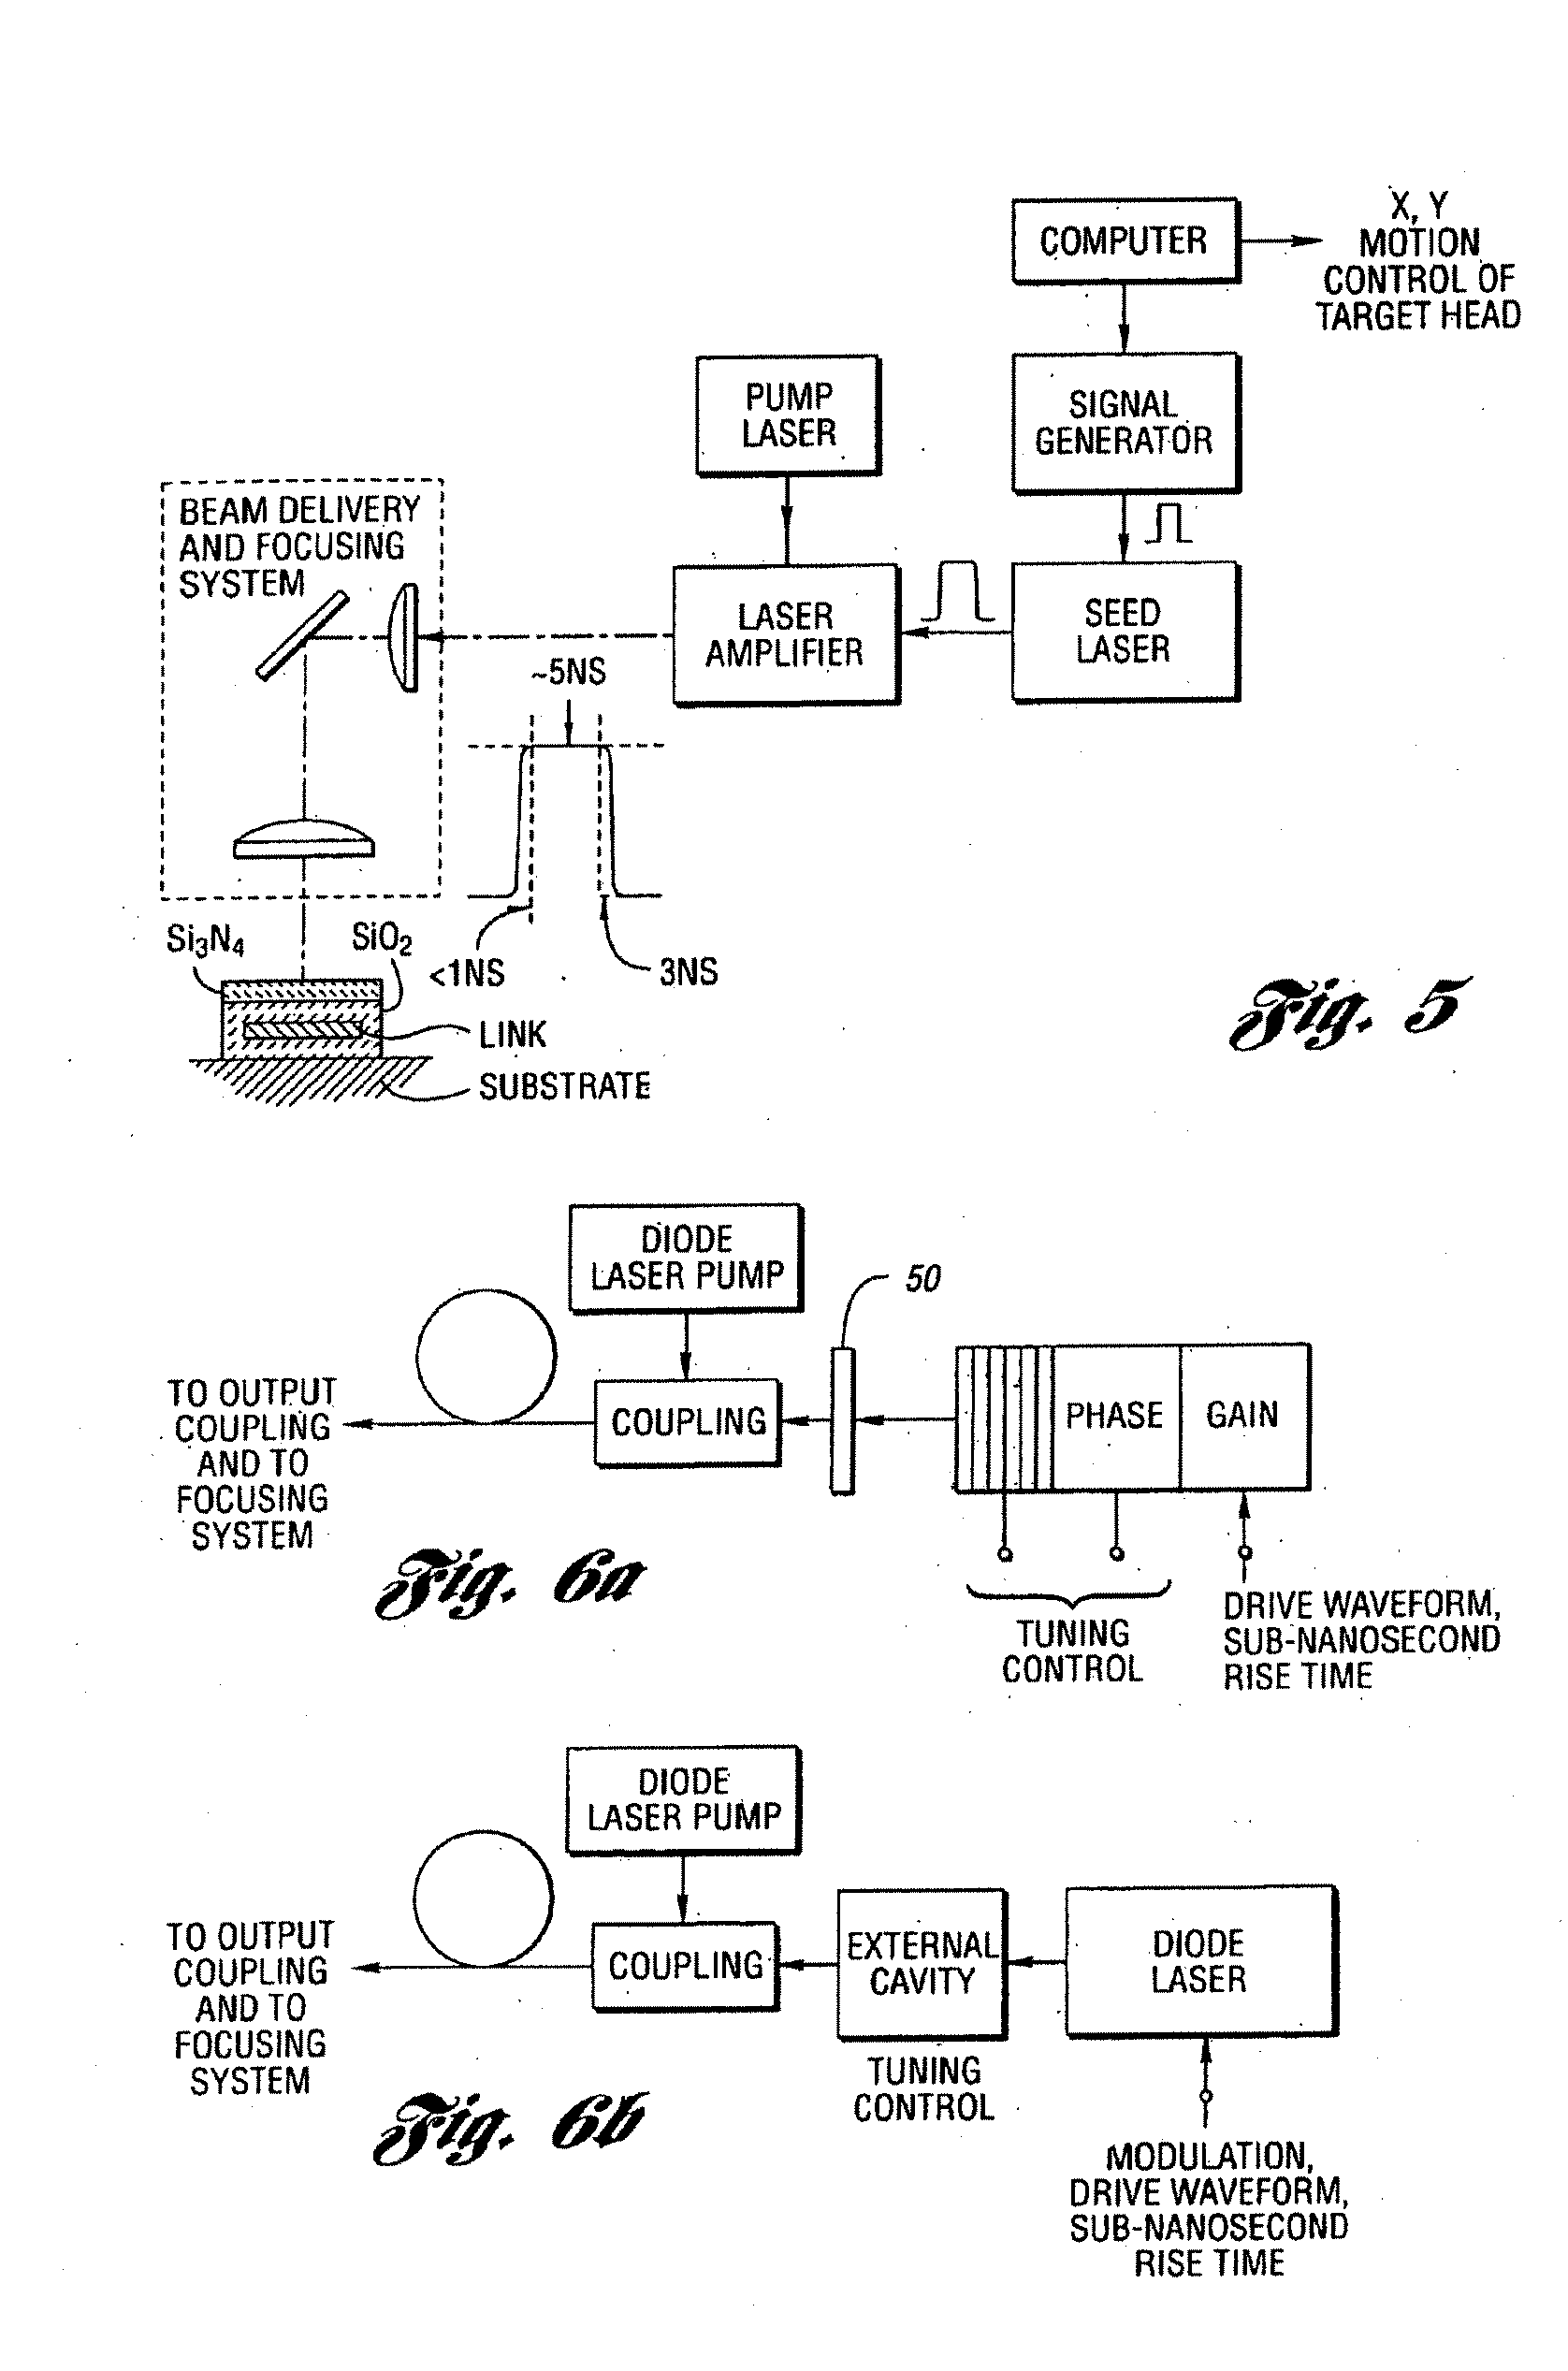 Energy efficient, laser-based method and system for processing target material